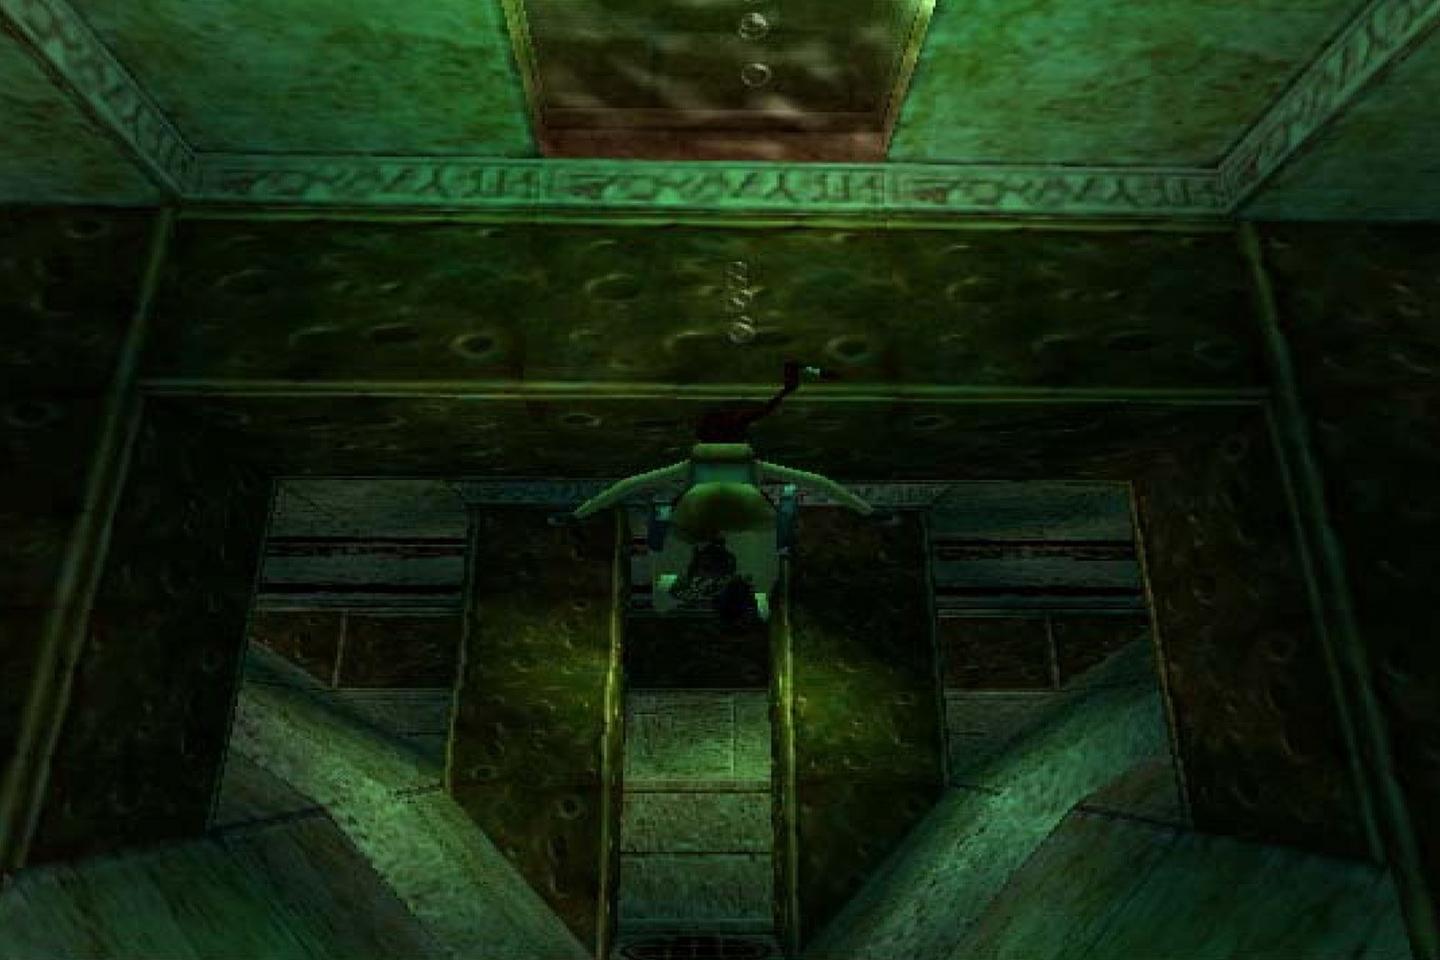 A screenshot from a video game showing a character swimming underwater in a green-lit, submerged room with metallic walls and a small opening at the top.